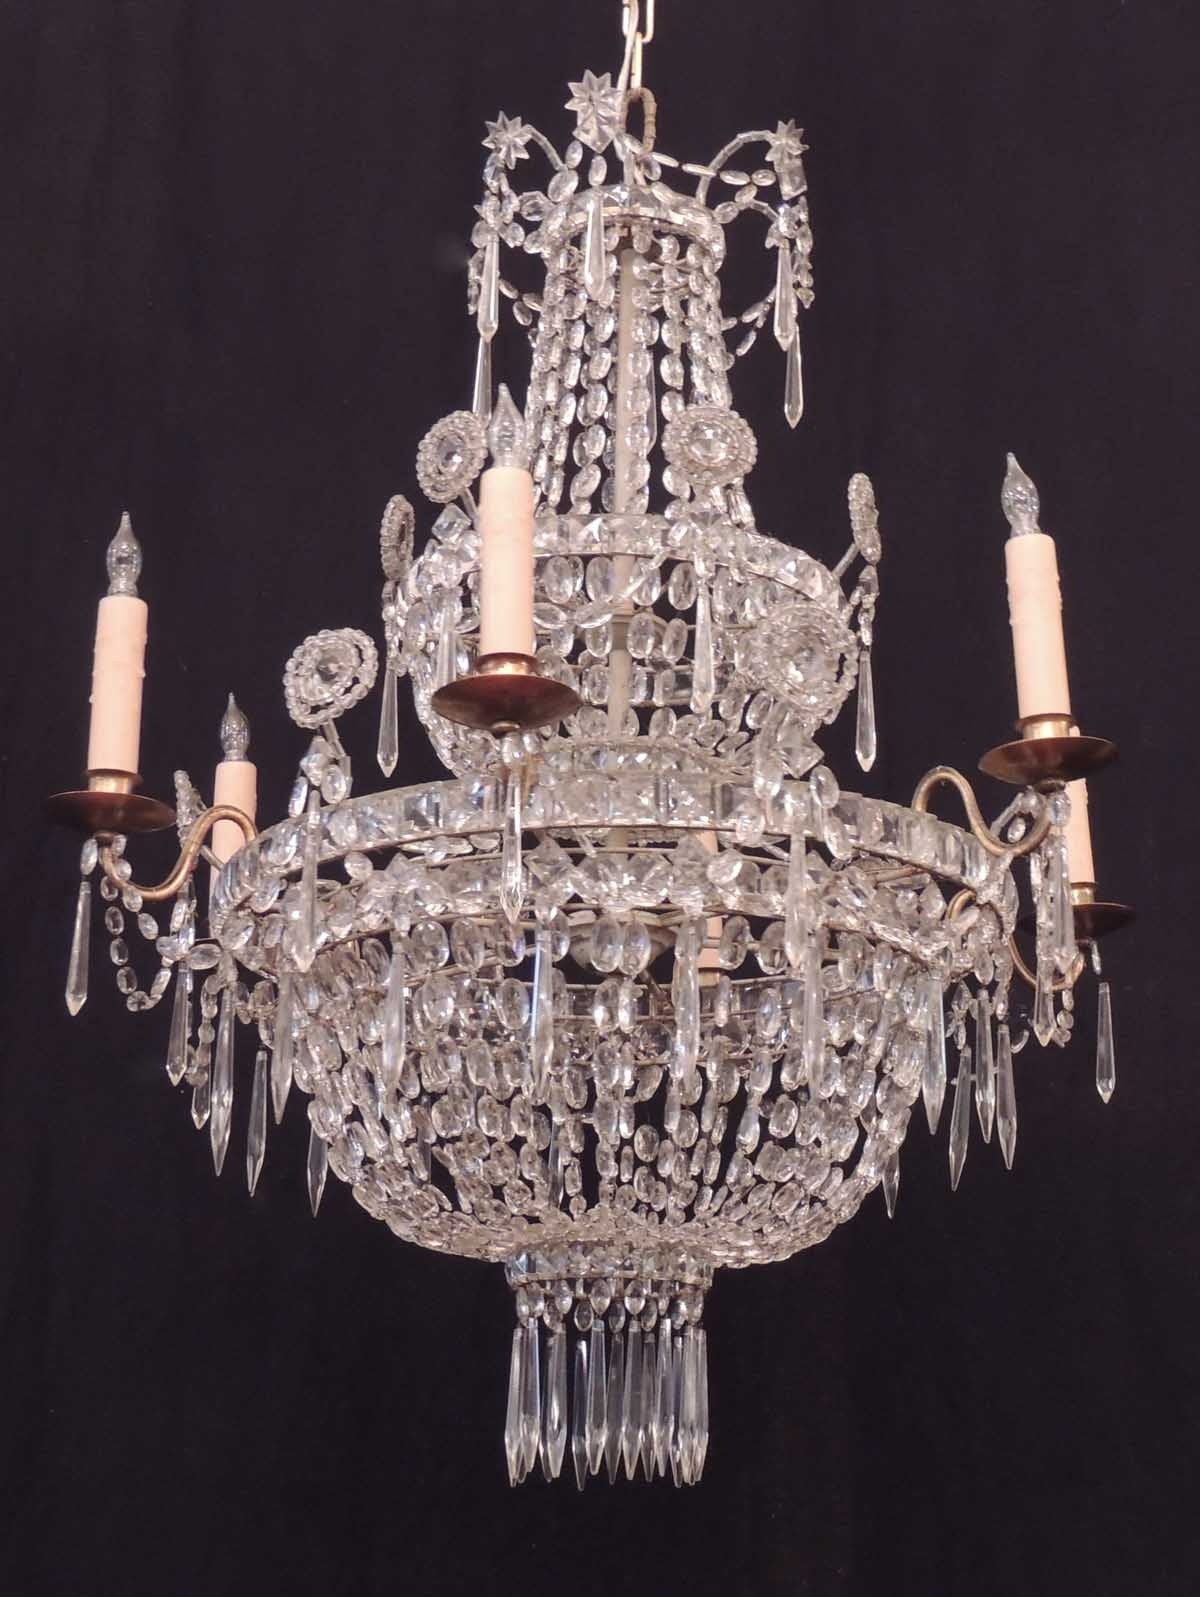 This English Regency crystal chandelier is a spectacular piece.  The body of the chandelier supports two tiers of crystal swag baskets and six candle arms.  The piece is resplendent with crystal swags, drops, and rosettes.  It has been recently